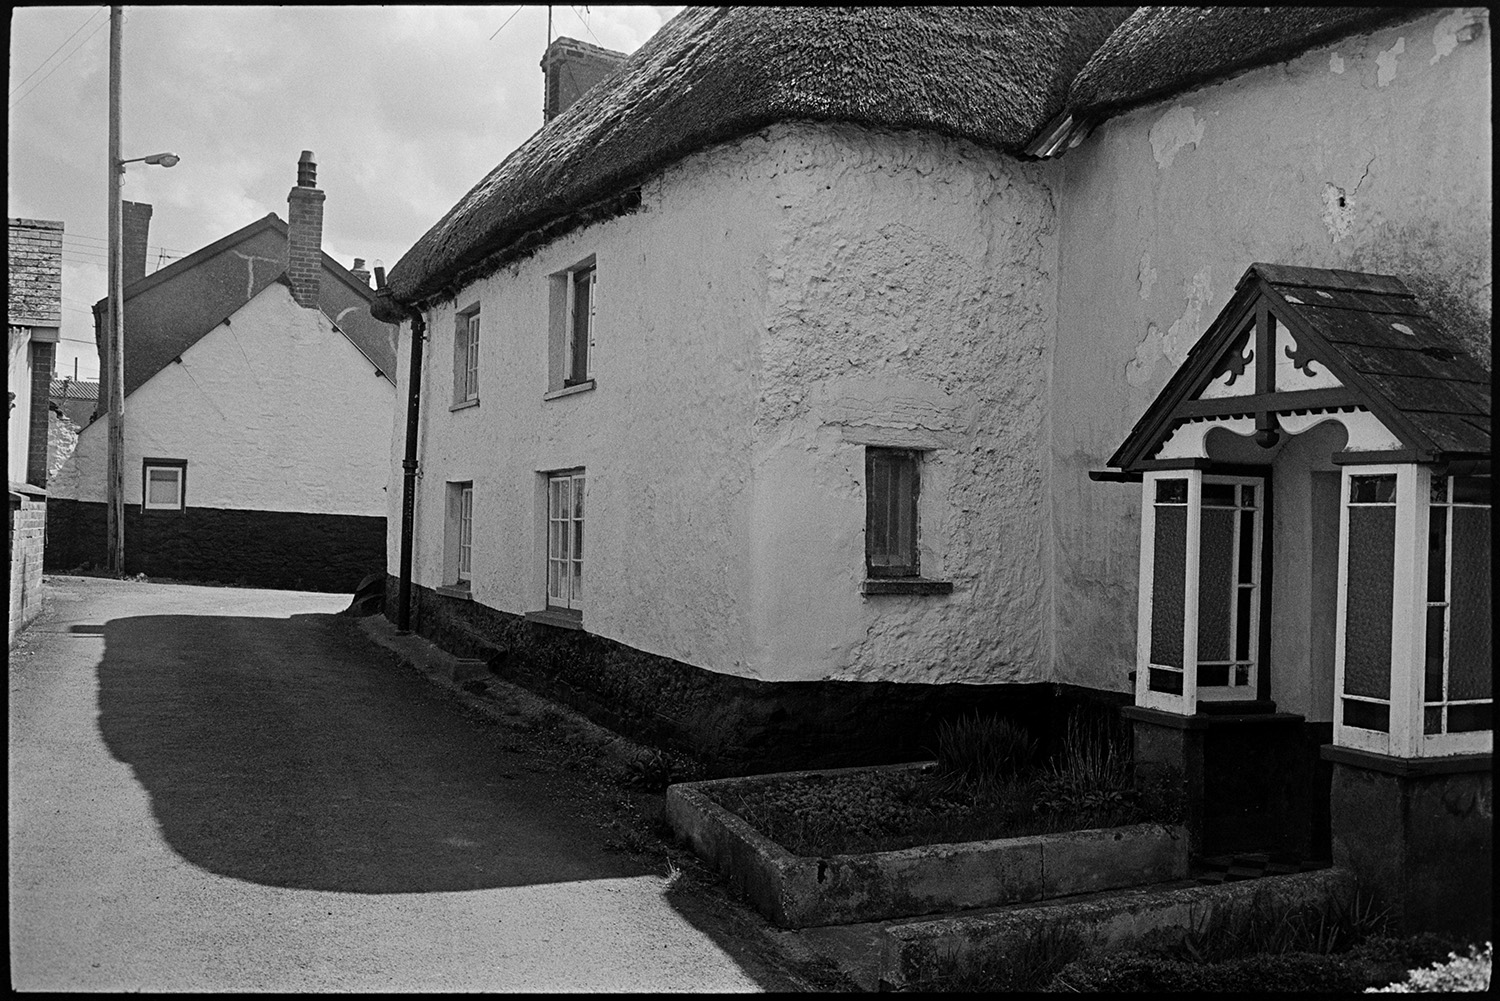 Street scenes with horse, cob and thatched cottages, porch. 
[A cob and thatch cottage with an ornate porch, on a street on Kings Nympton.]